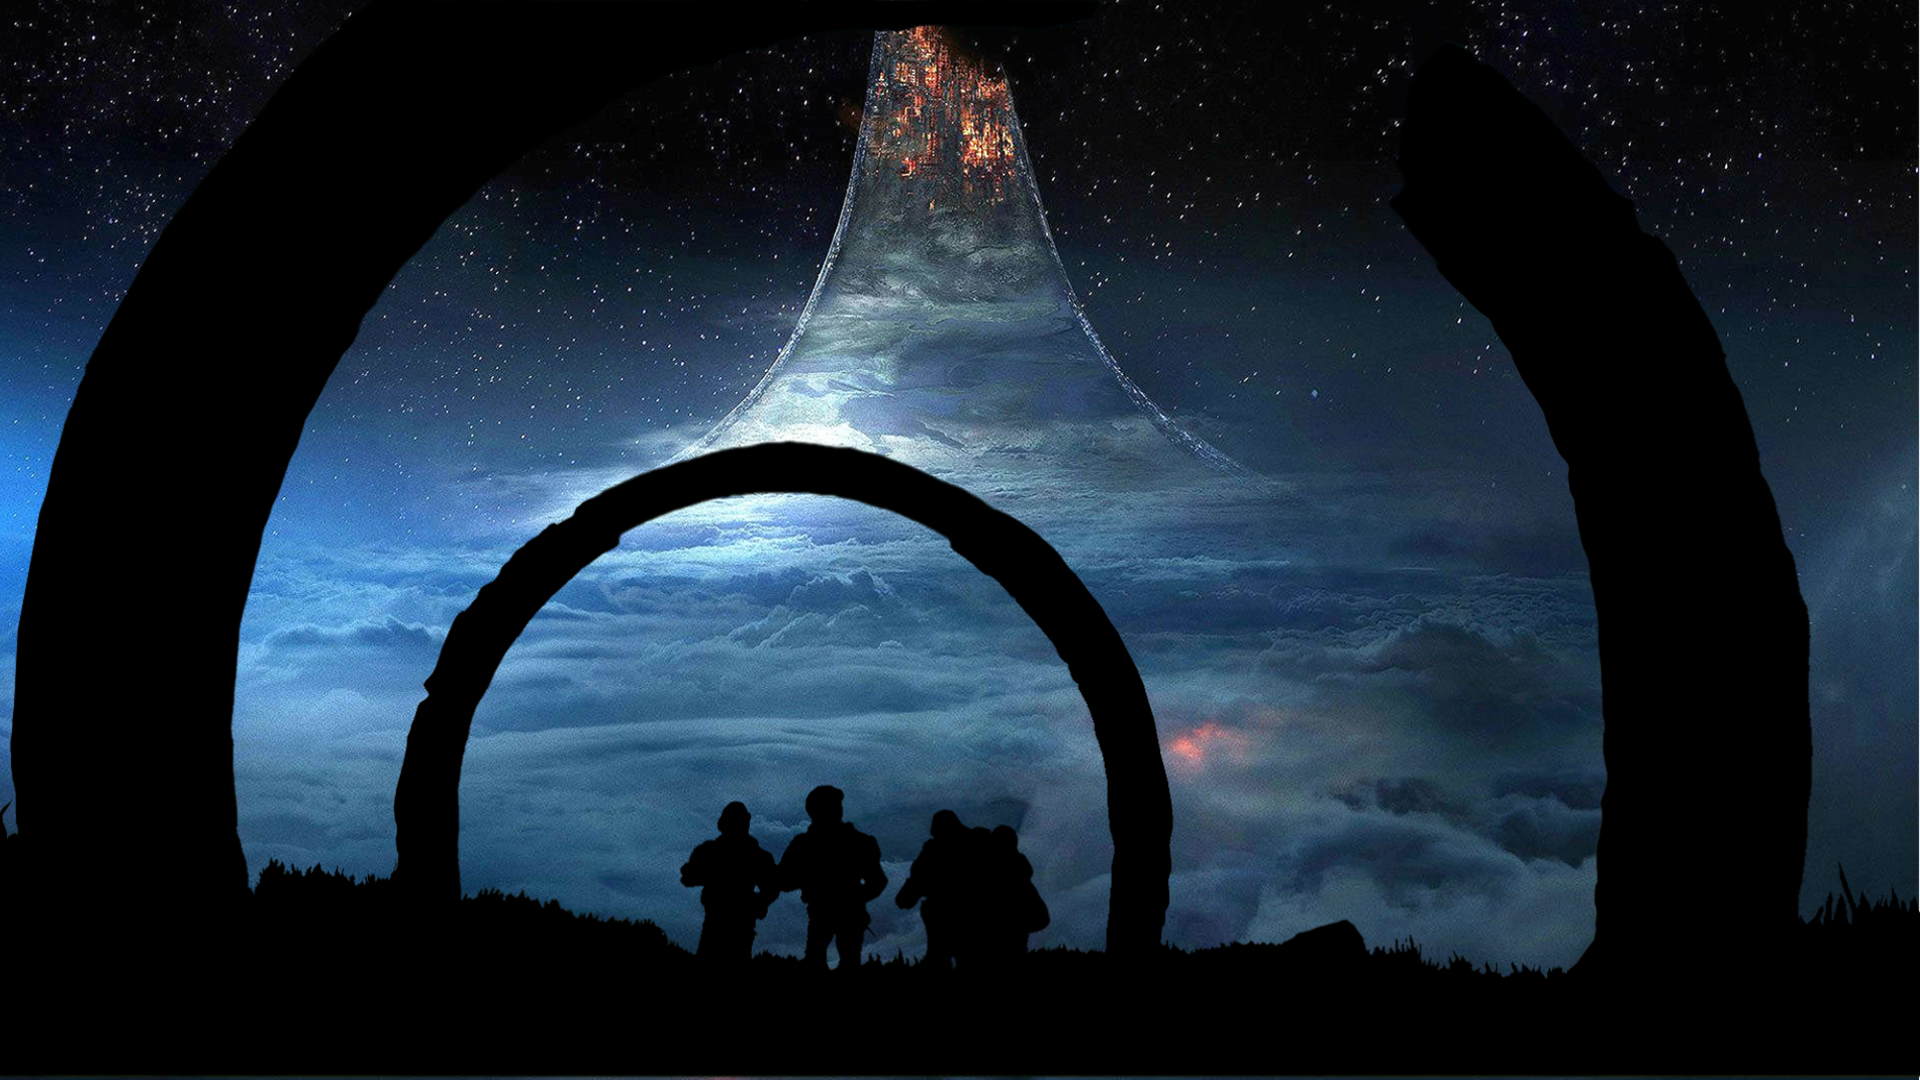 Halo Infinite Marines Wallpaper that I Created link in comments